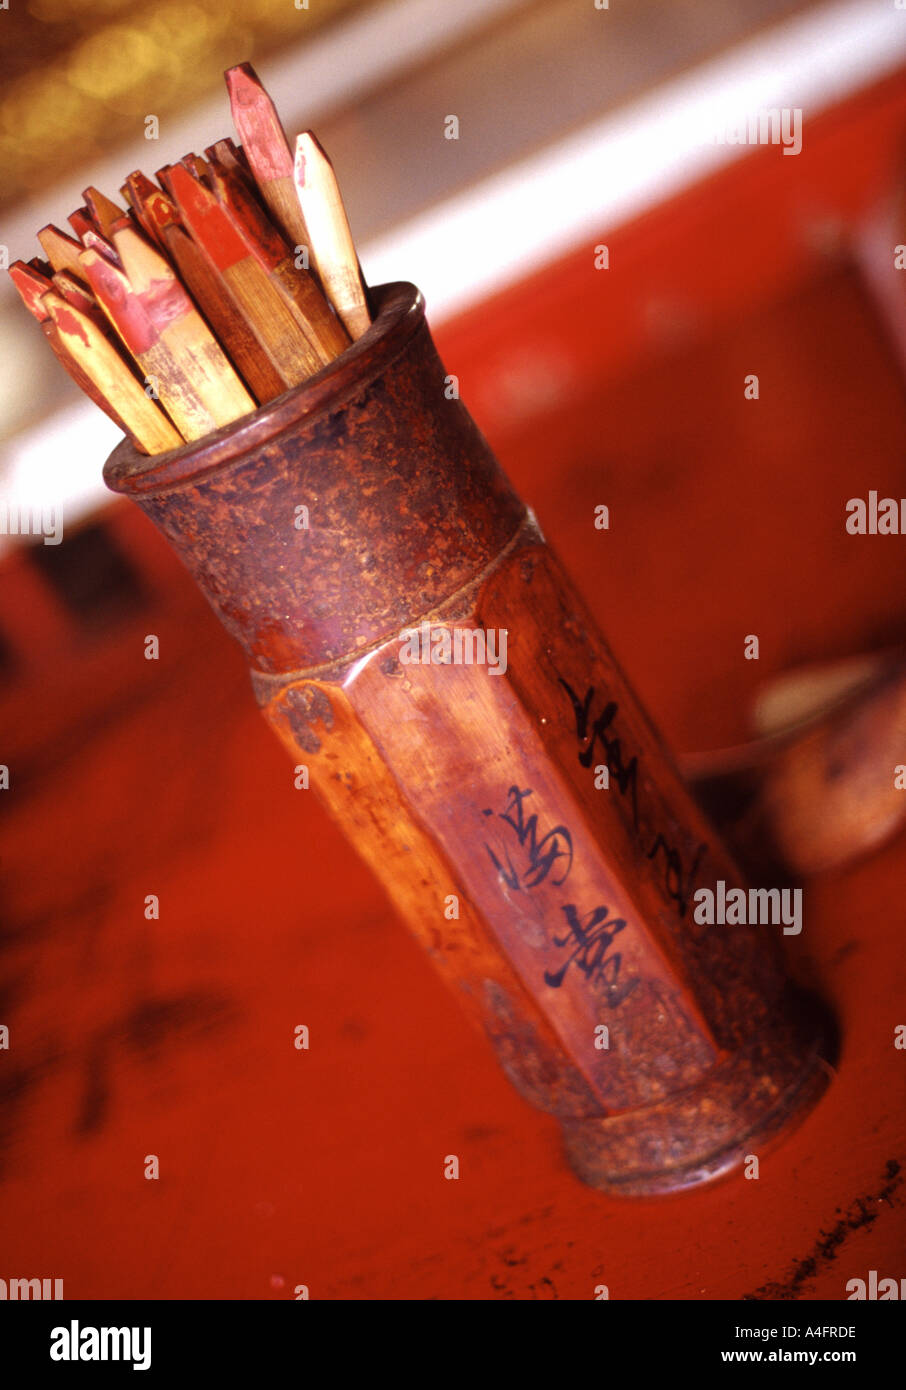 Malayesia fortune teller sticks inside a temple Stock Photo